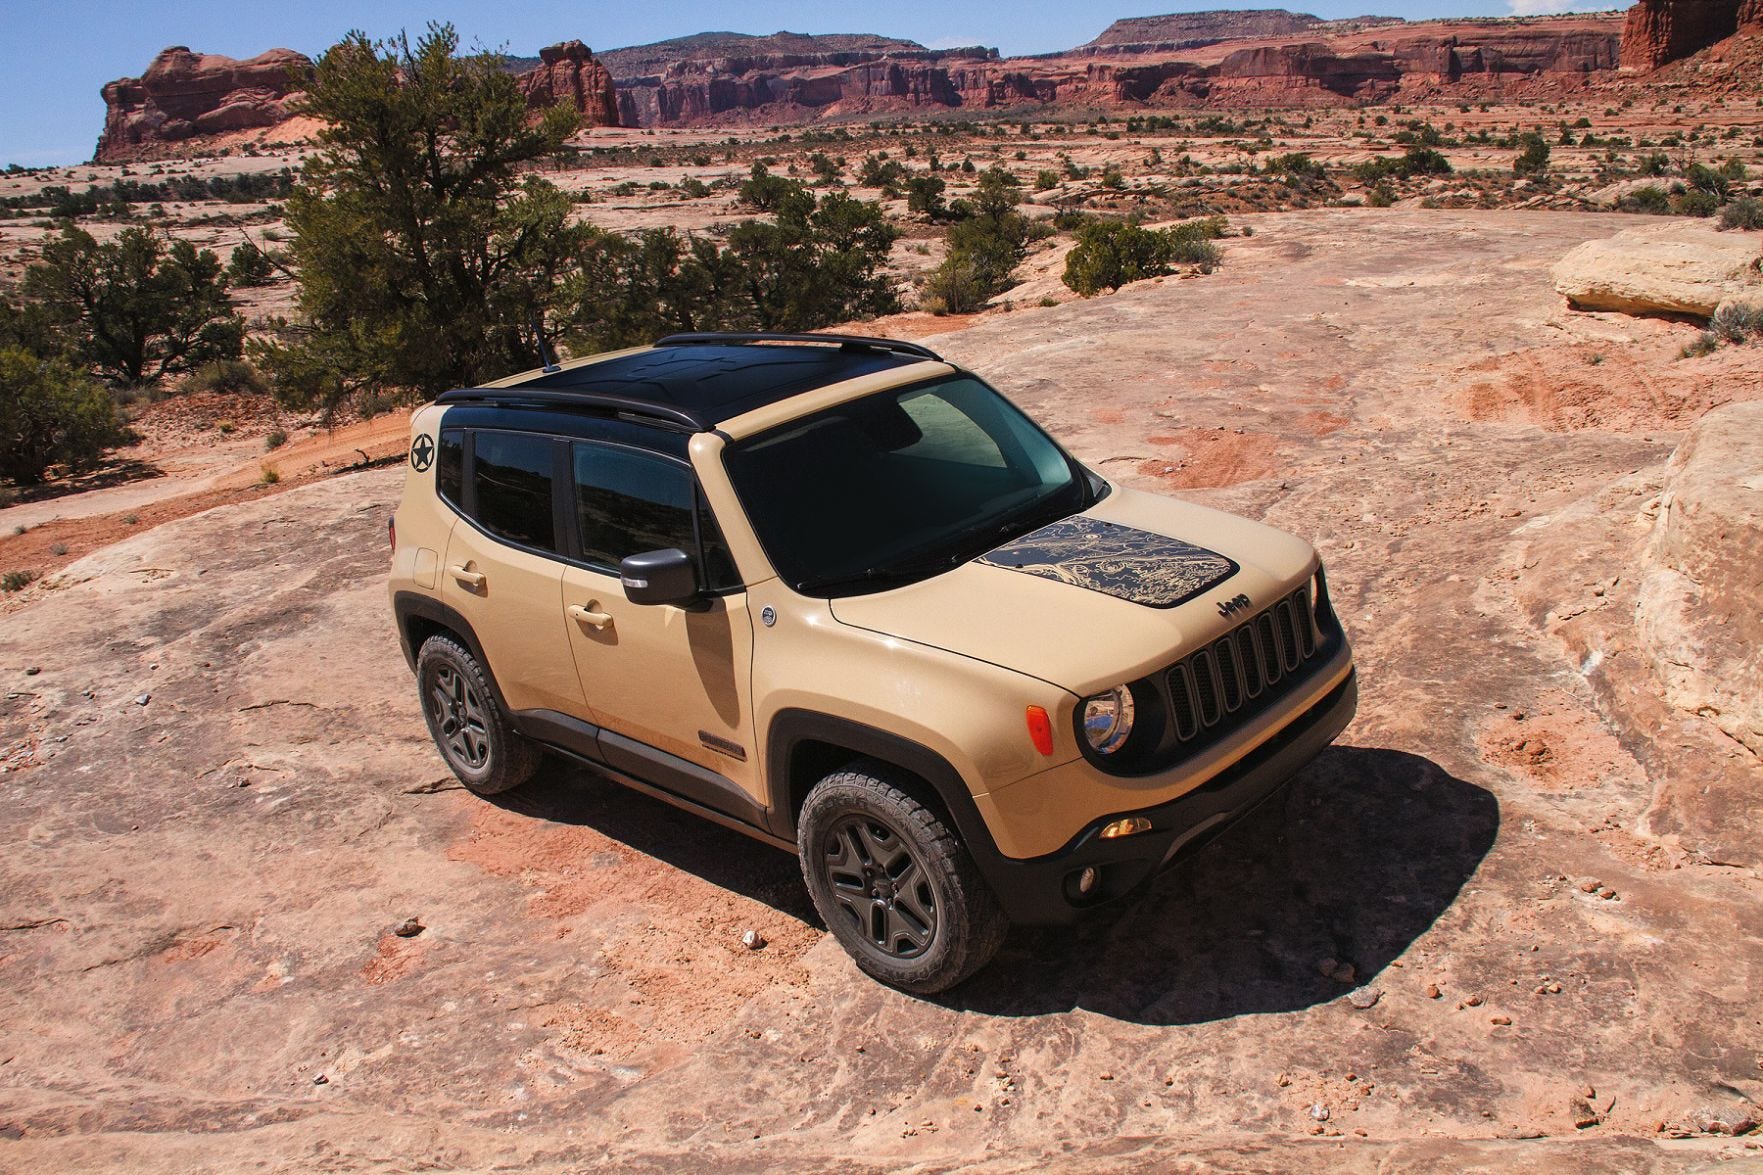 2017 Jeep Renegade: Off-Road, Open-Air